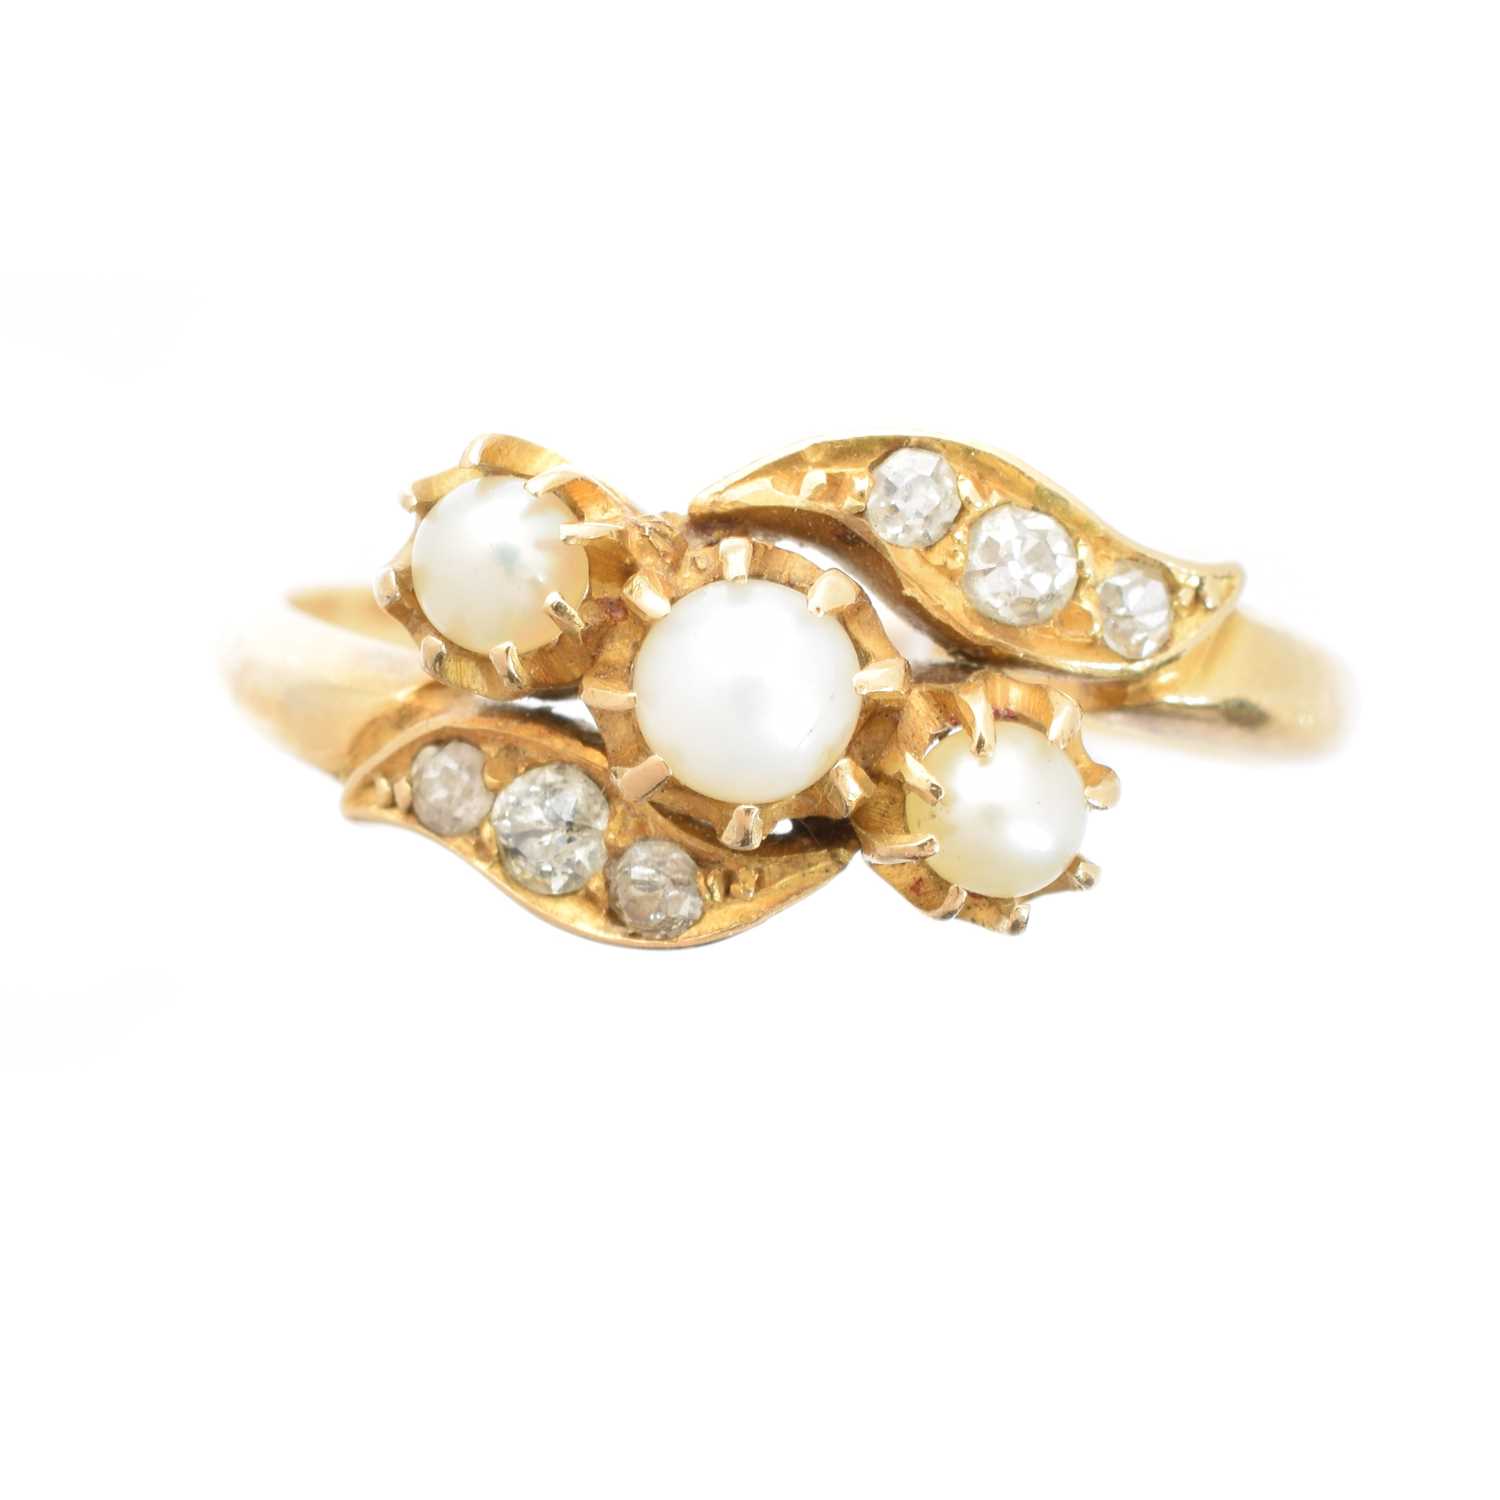 Lot 172 - An early 20th century 18ct gold pearl and diamond dress ring